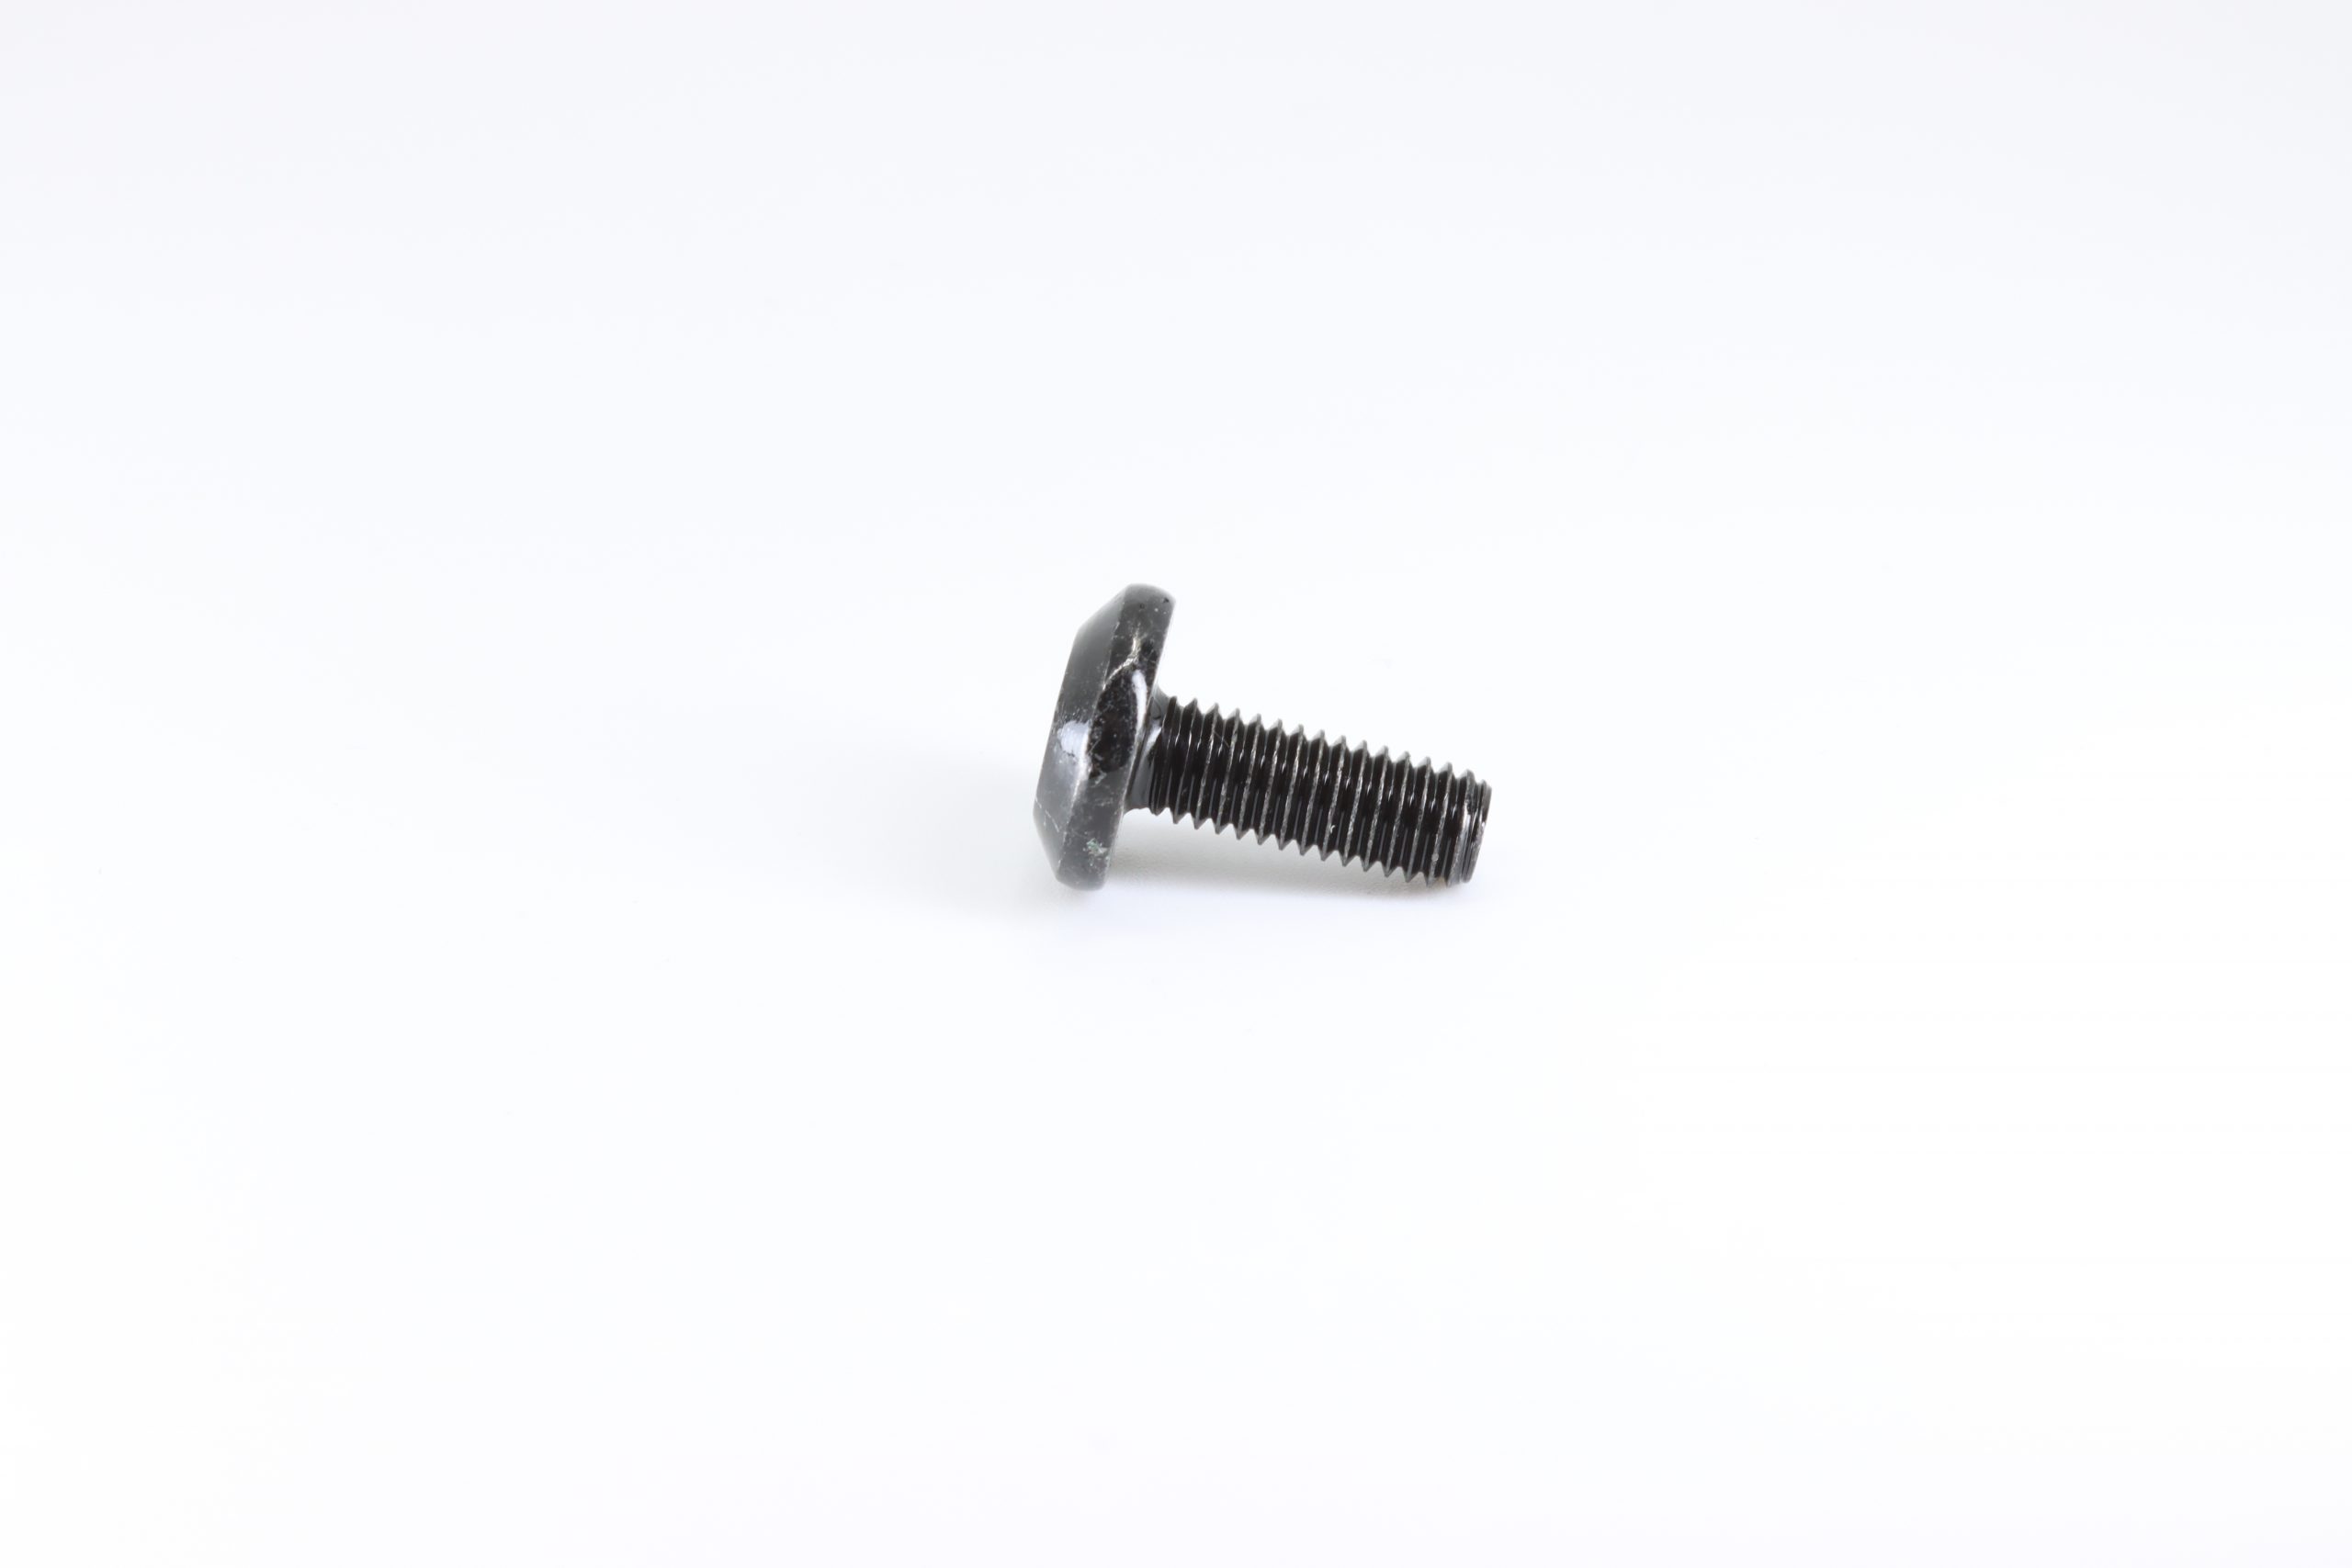 INNER HEX SCREW M6x16, Pack of 6 - CFMoto OEM - 6NQ#-000206-6001 - CFMoto  USA Parts - Operated by Curren RV